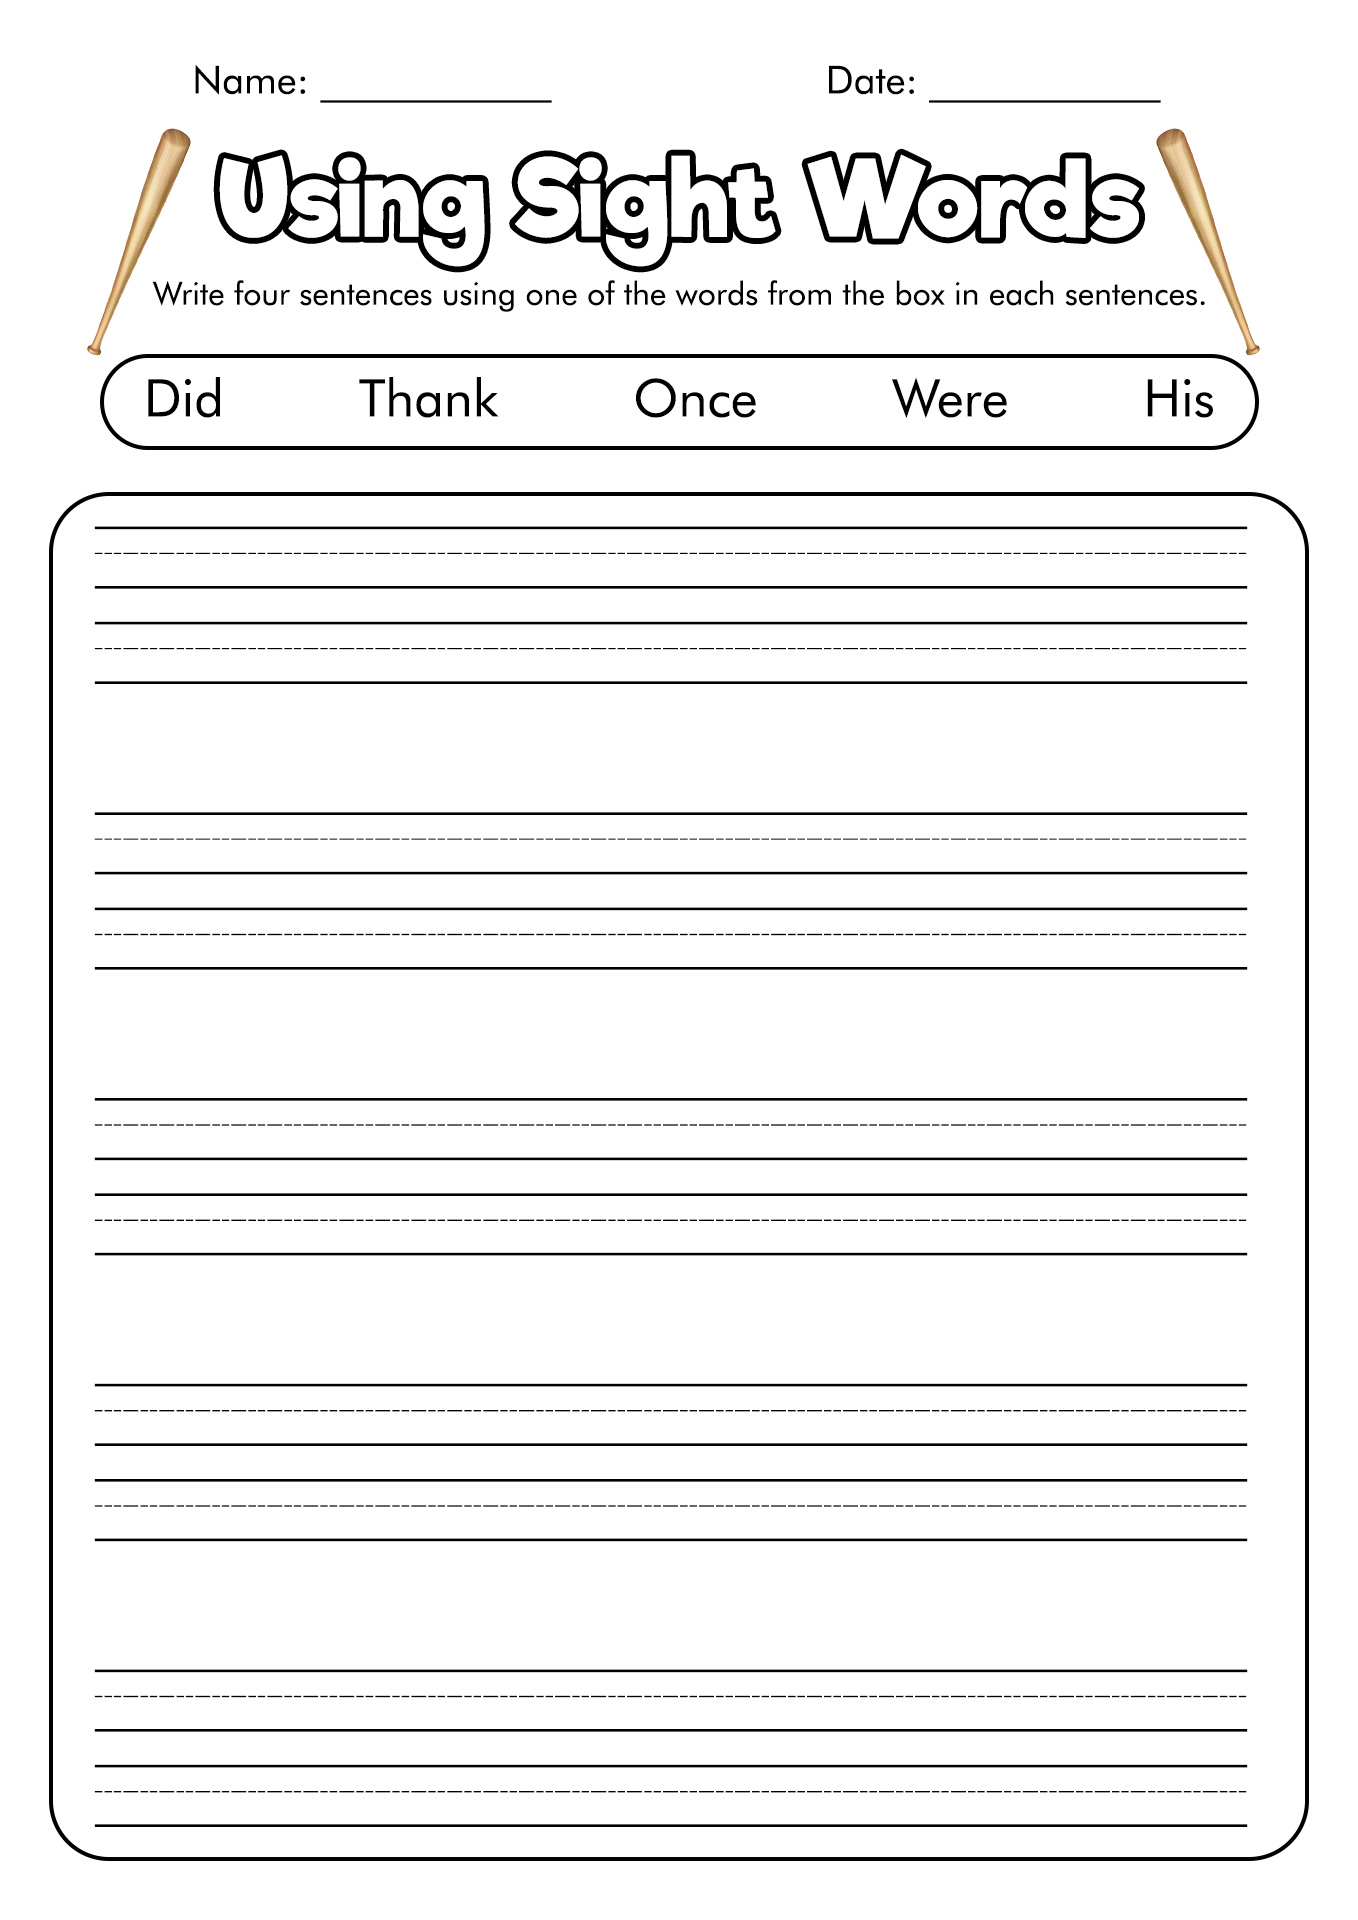 awesome-first-grade-writing-worksheets-free-printable-photos-rugby